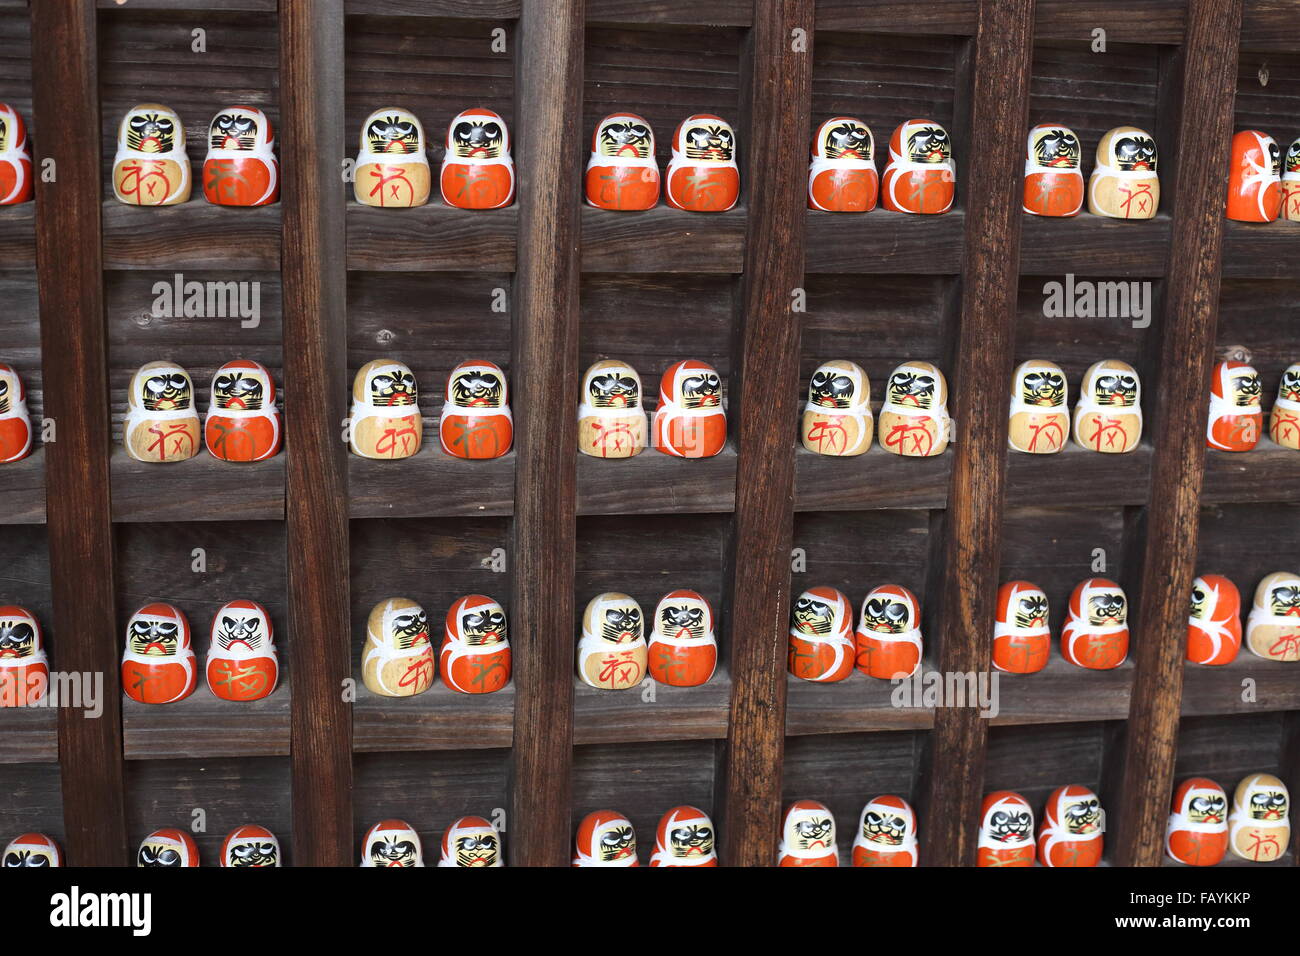 daruma or red-painted good-luck doll in Japan Stock Photo